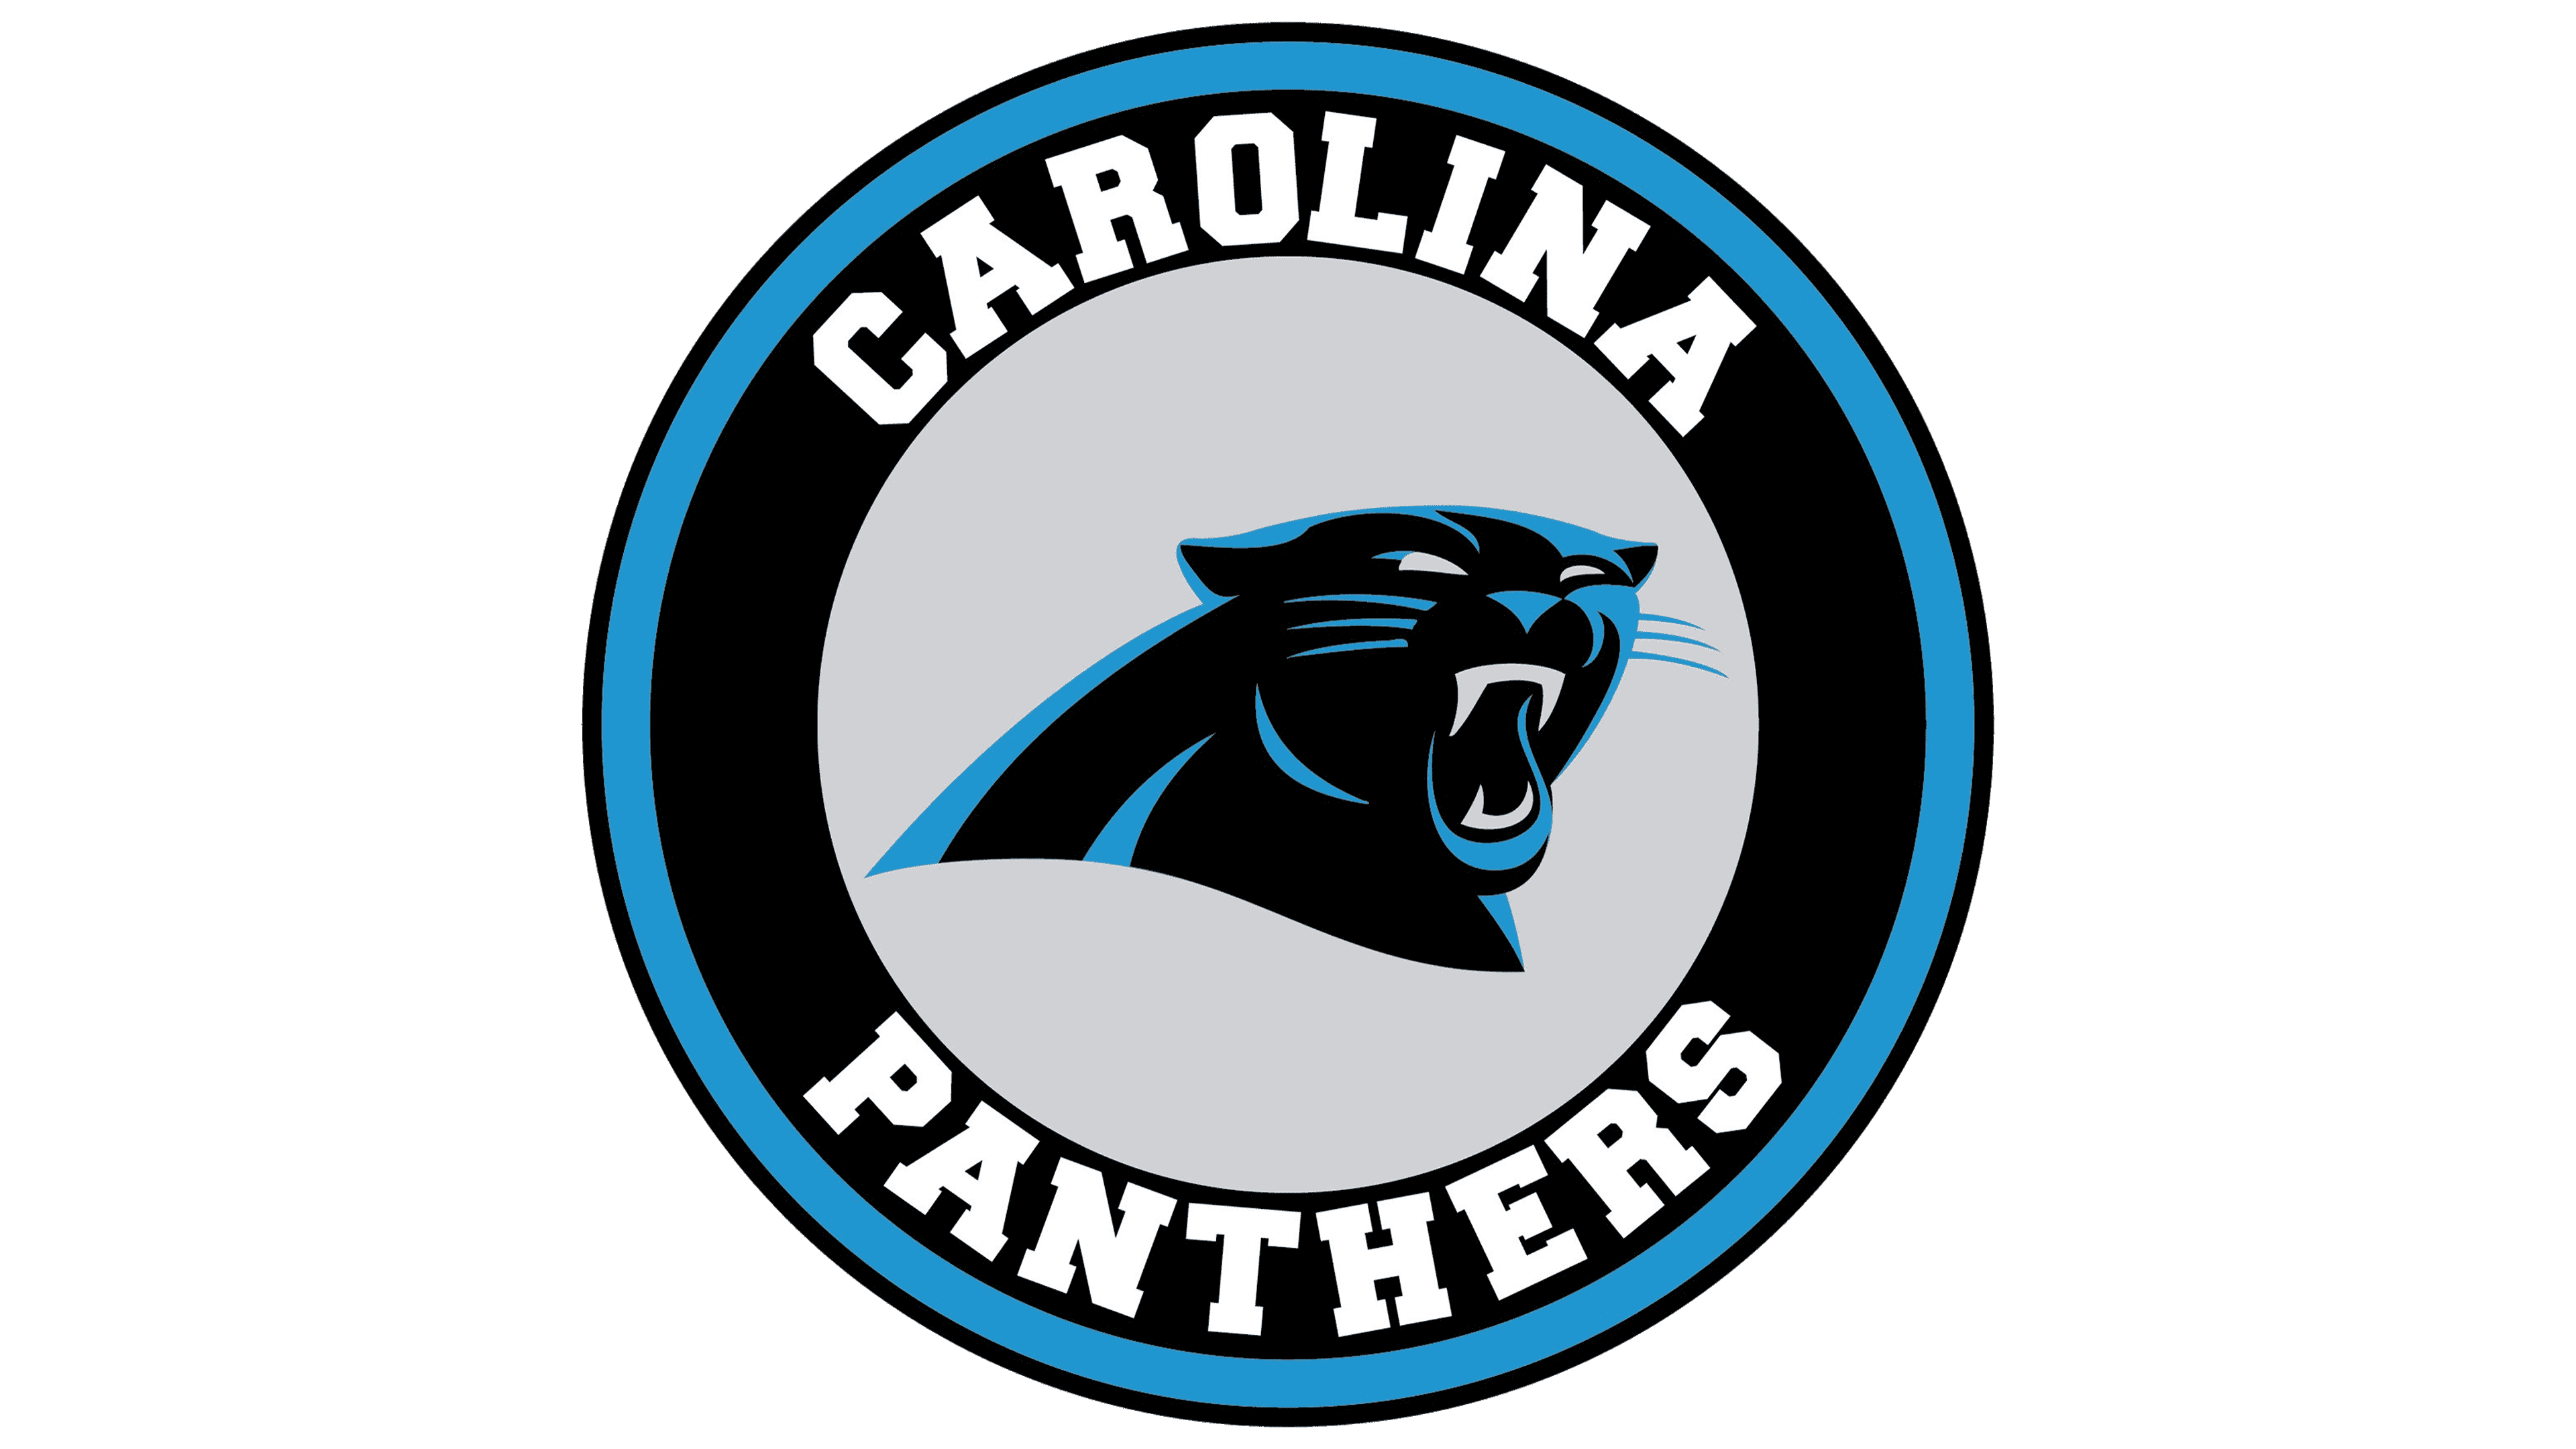 Carolina Panthers Logo and sign, new logo meaning and history, PNG, SVG